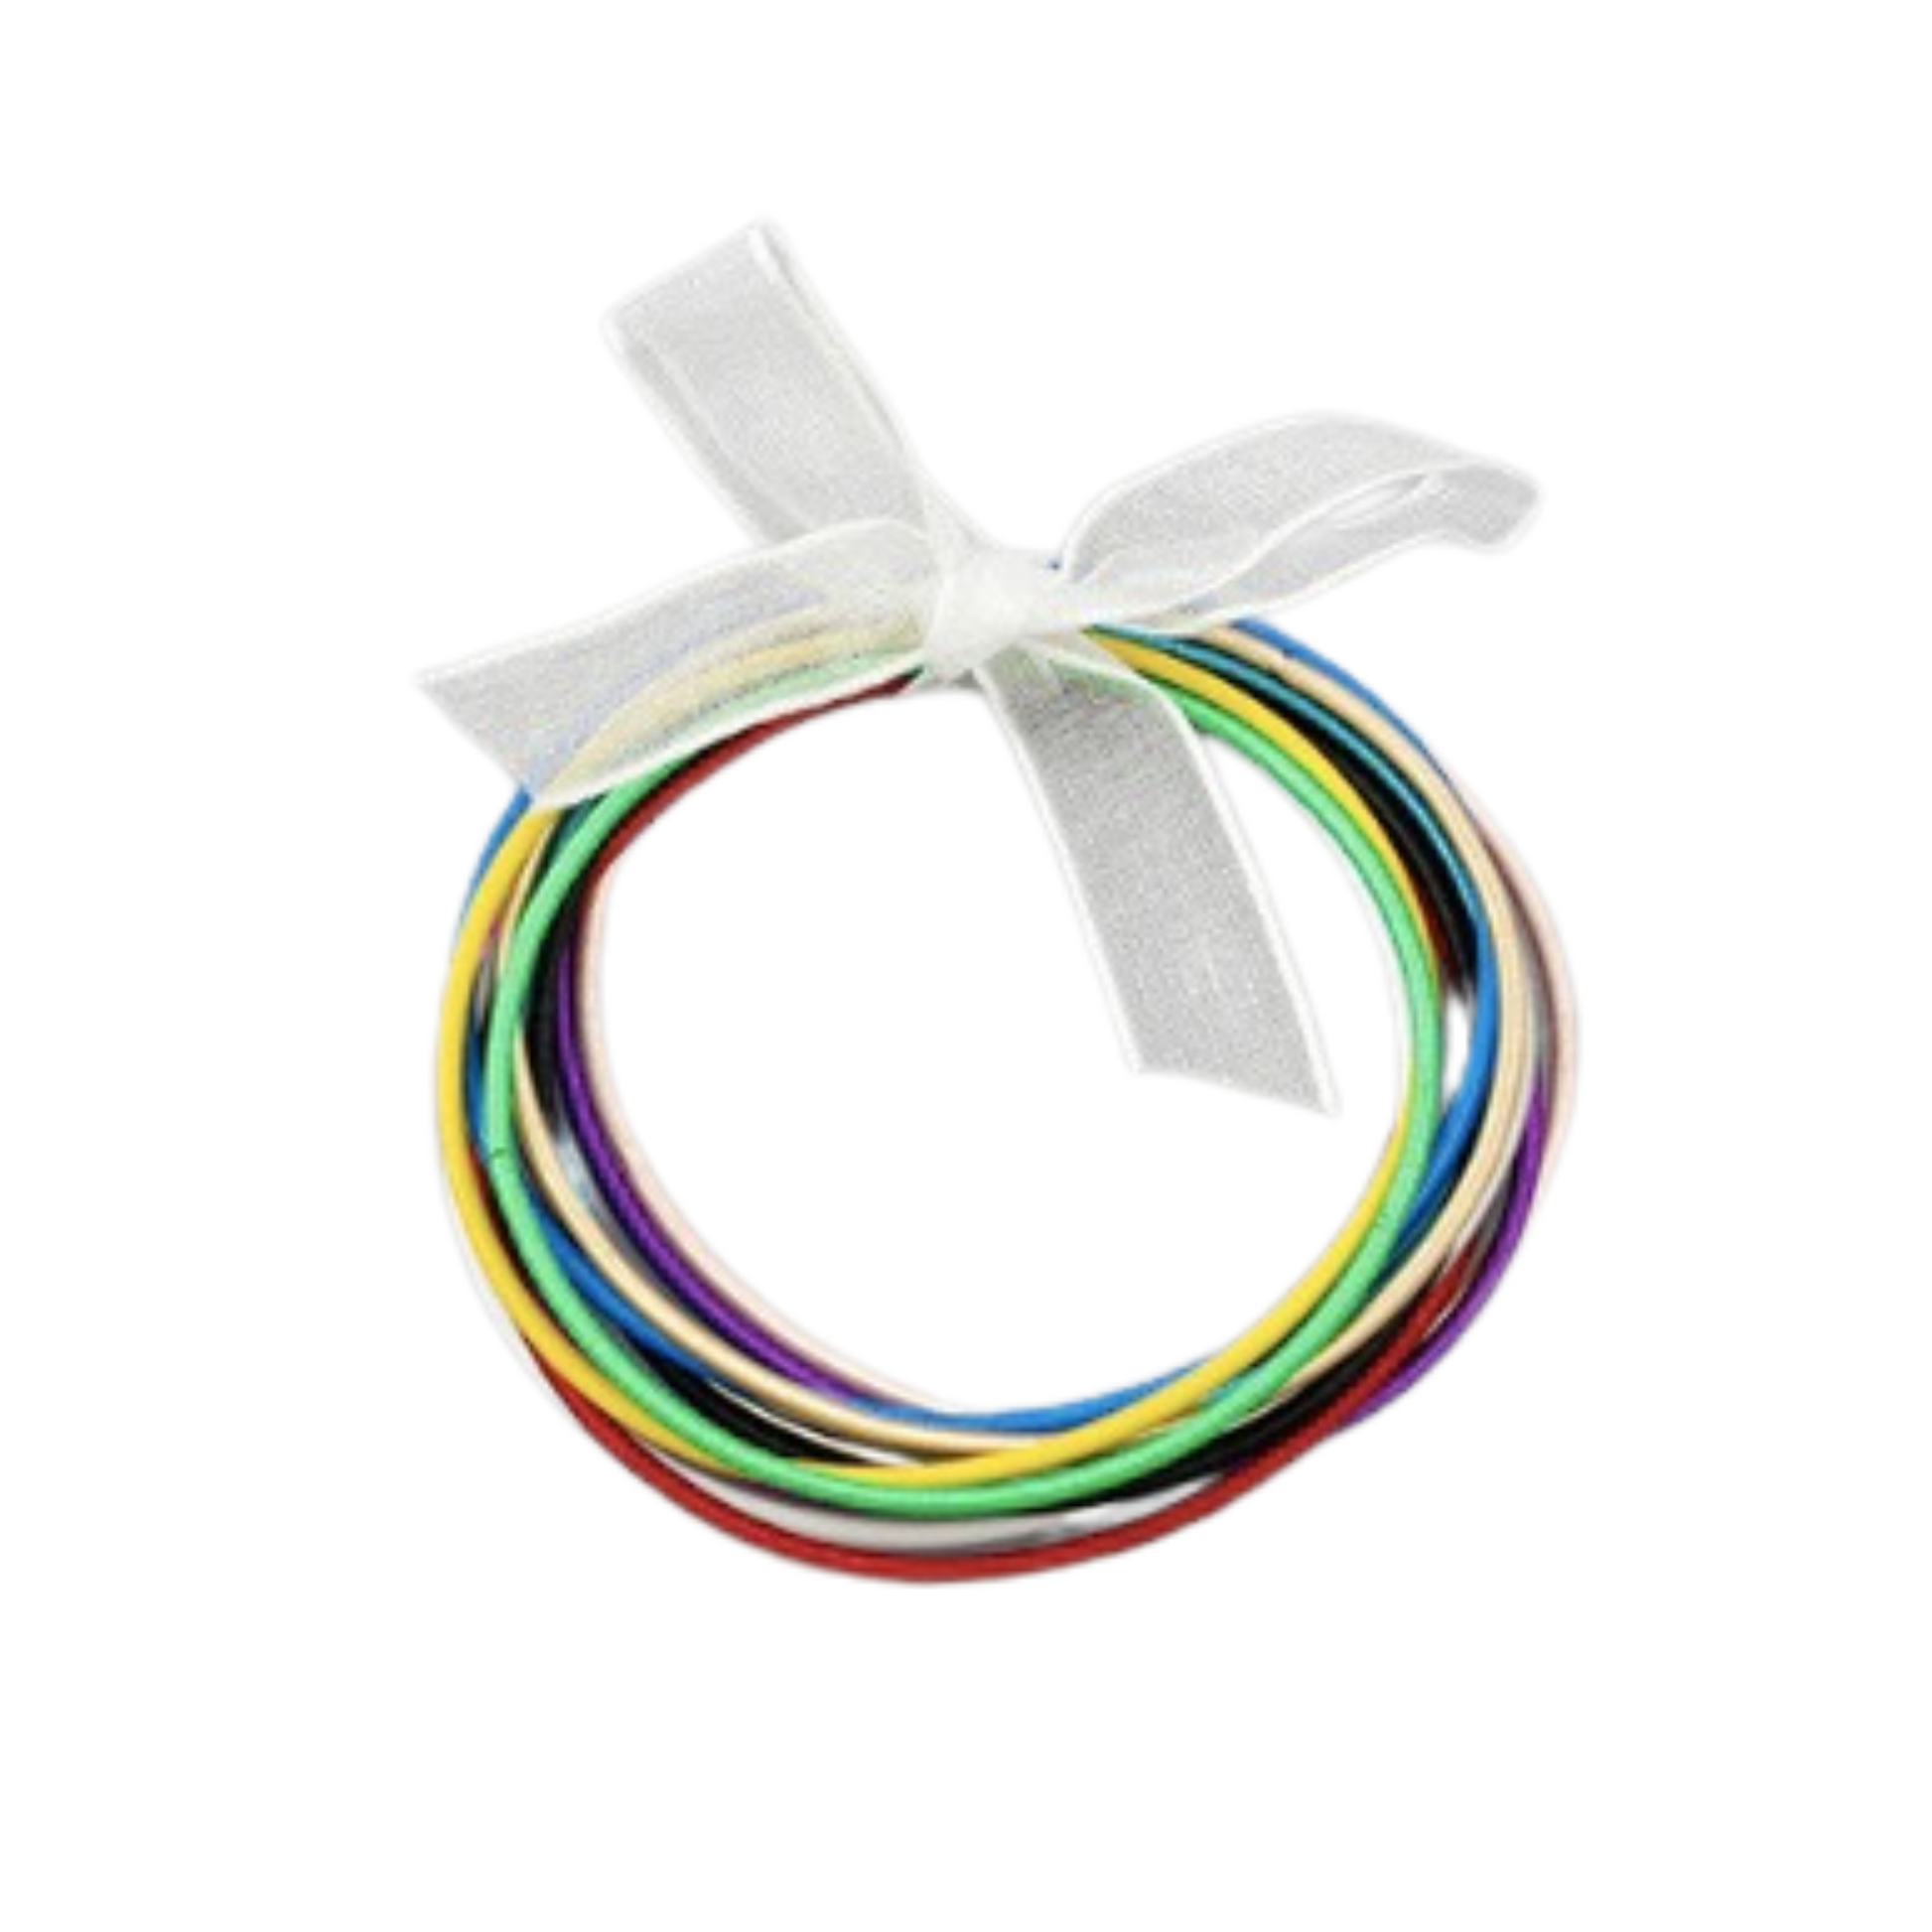 Add a splash of color to your wardrobe with these fashionable stretchy bangles. The corded multi-strand design features multiple colors, including pink or rainbow, for a unique look. Whether you're going to a special event or just want to add some flair to your everyday style, these bangles are the perfect accessory.